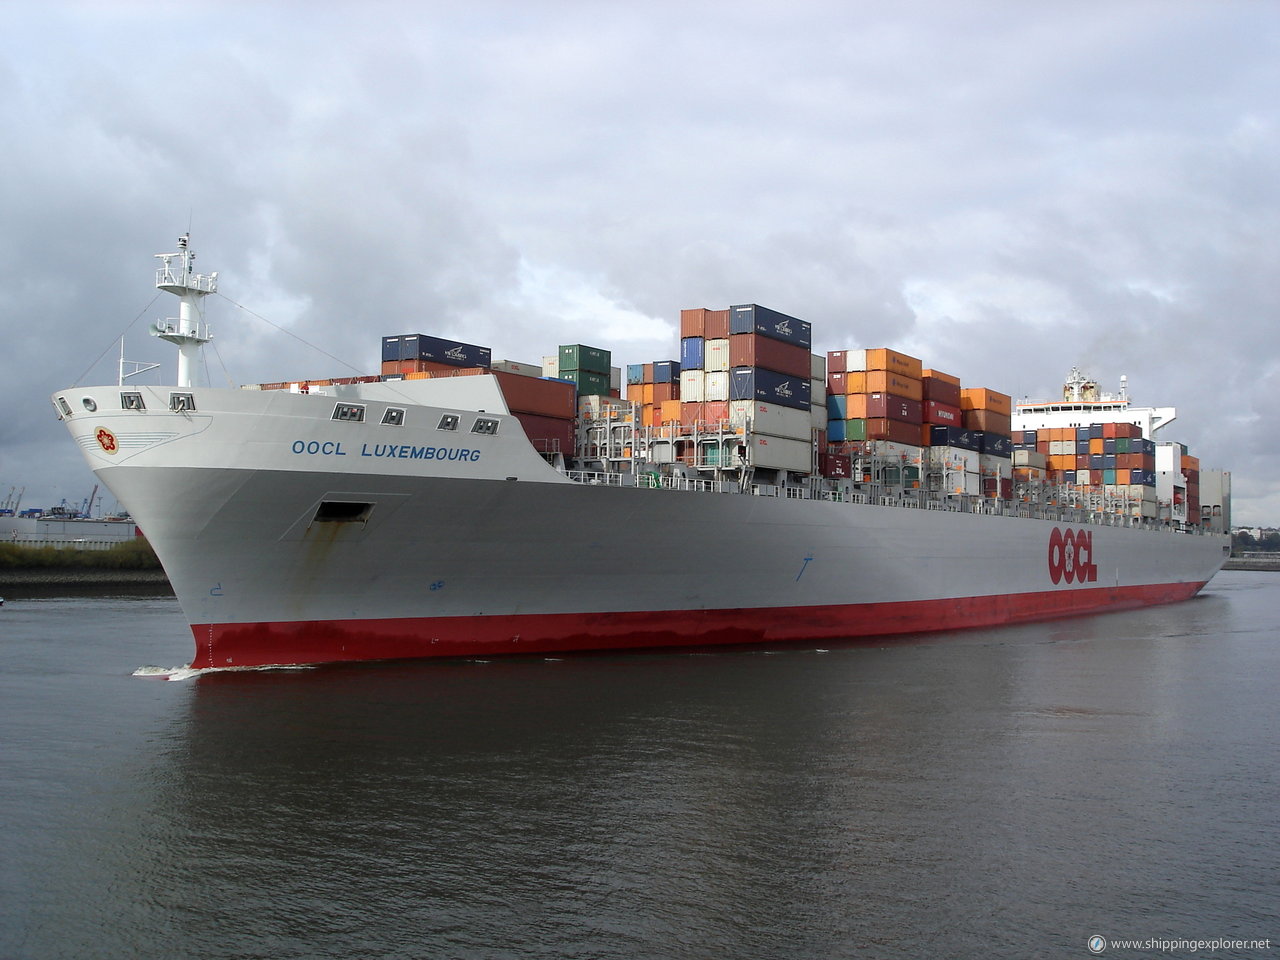 Oocl Luxembourg